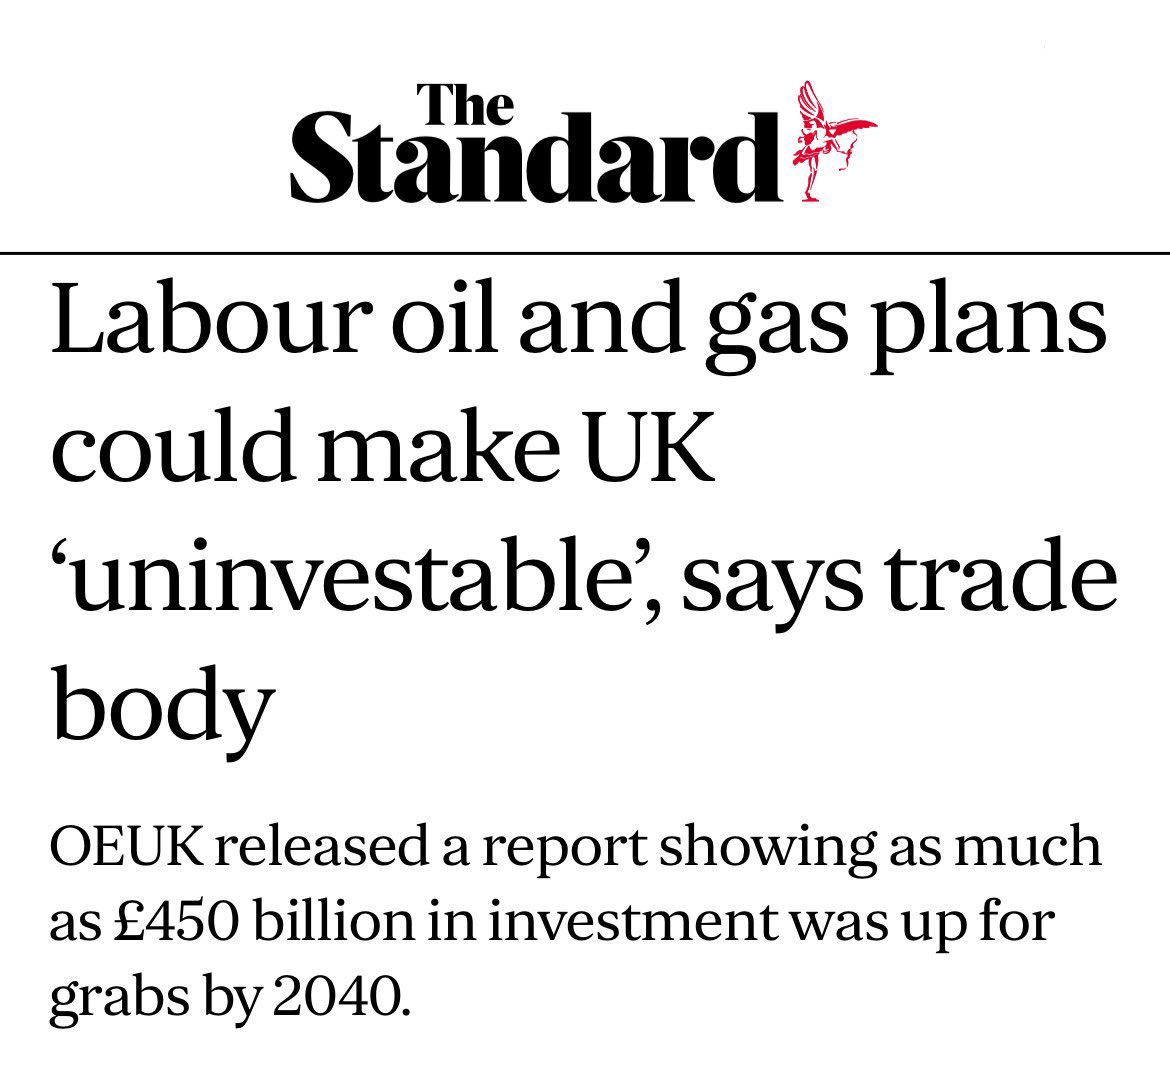 Rachel Reeves: Labour will boost investment. Industry: Labour’s plans will leave the country “uninvestable”. We’re a proud energy producing nation - first coal, then the North Sea, now clean energy too. Labour would put all of that, and £450bn of investment, at risk.